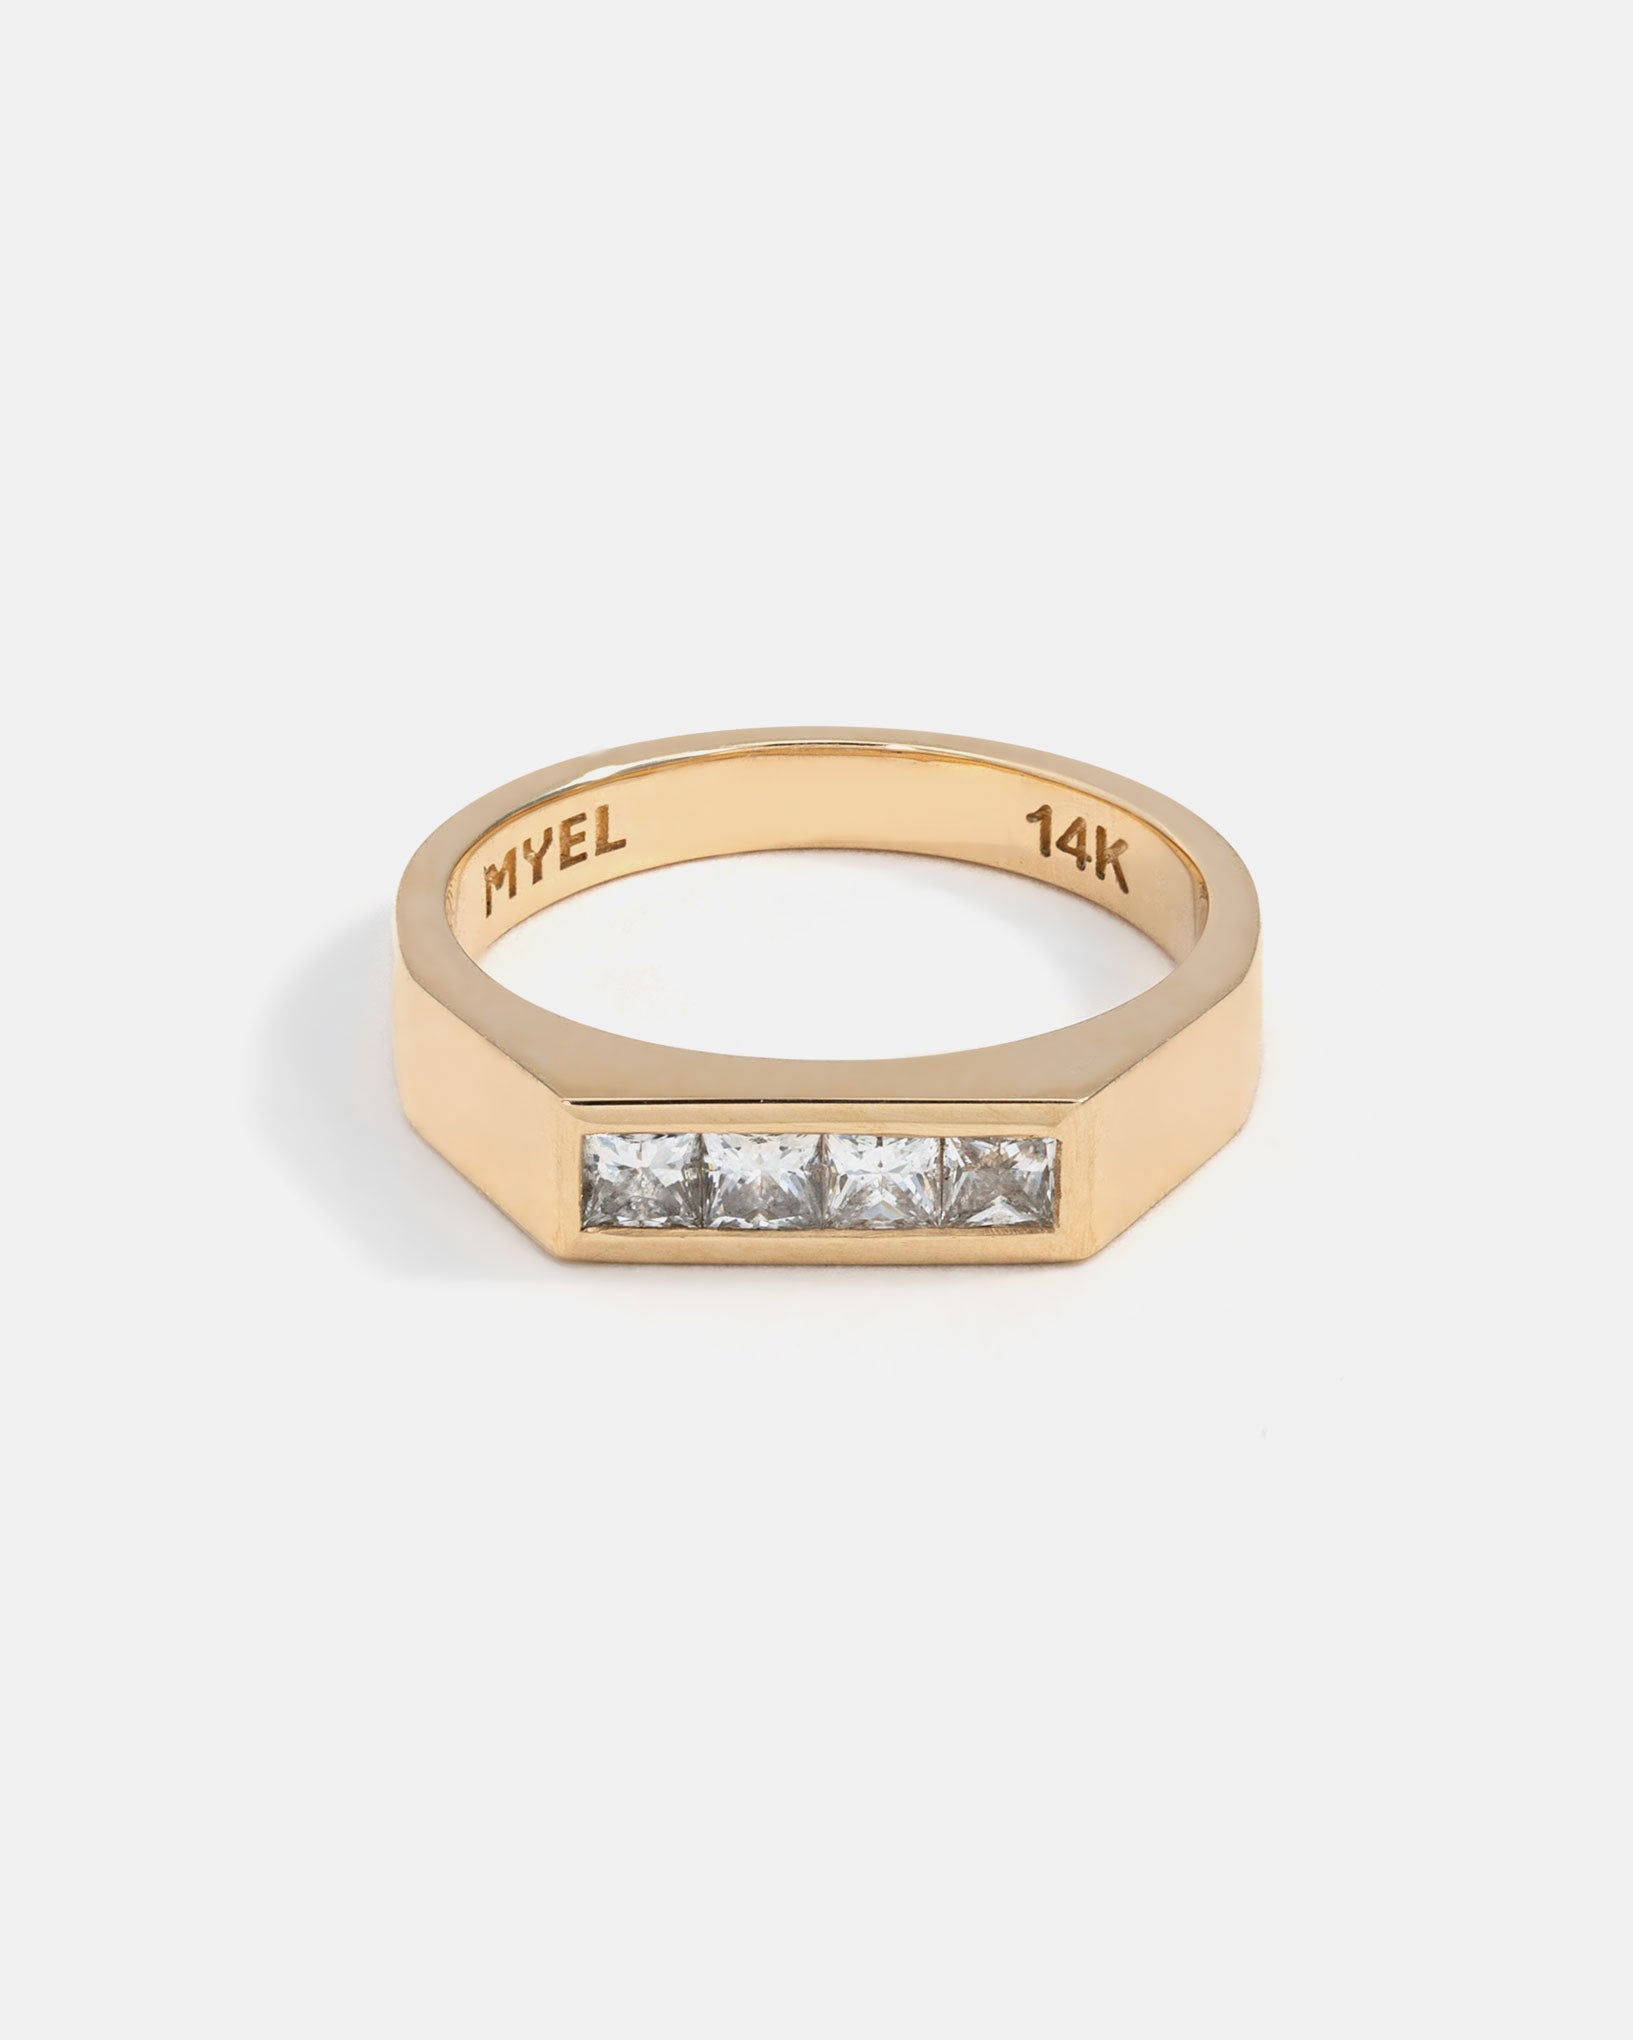 Theory 1 Ring in Fairmined Gold with lab grown Diamonds